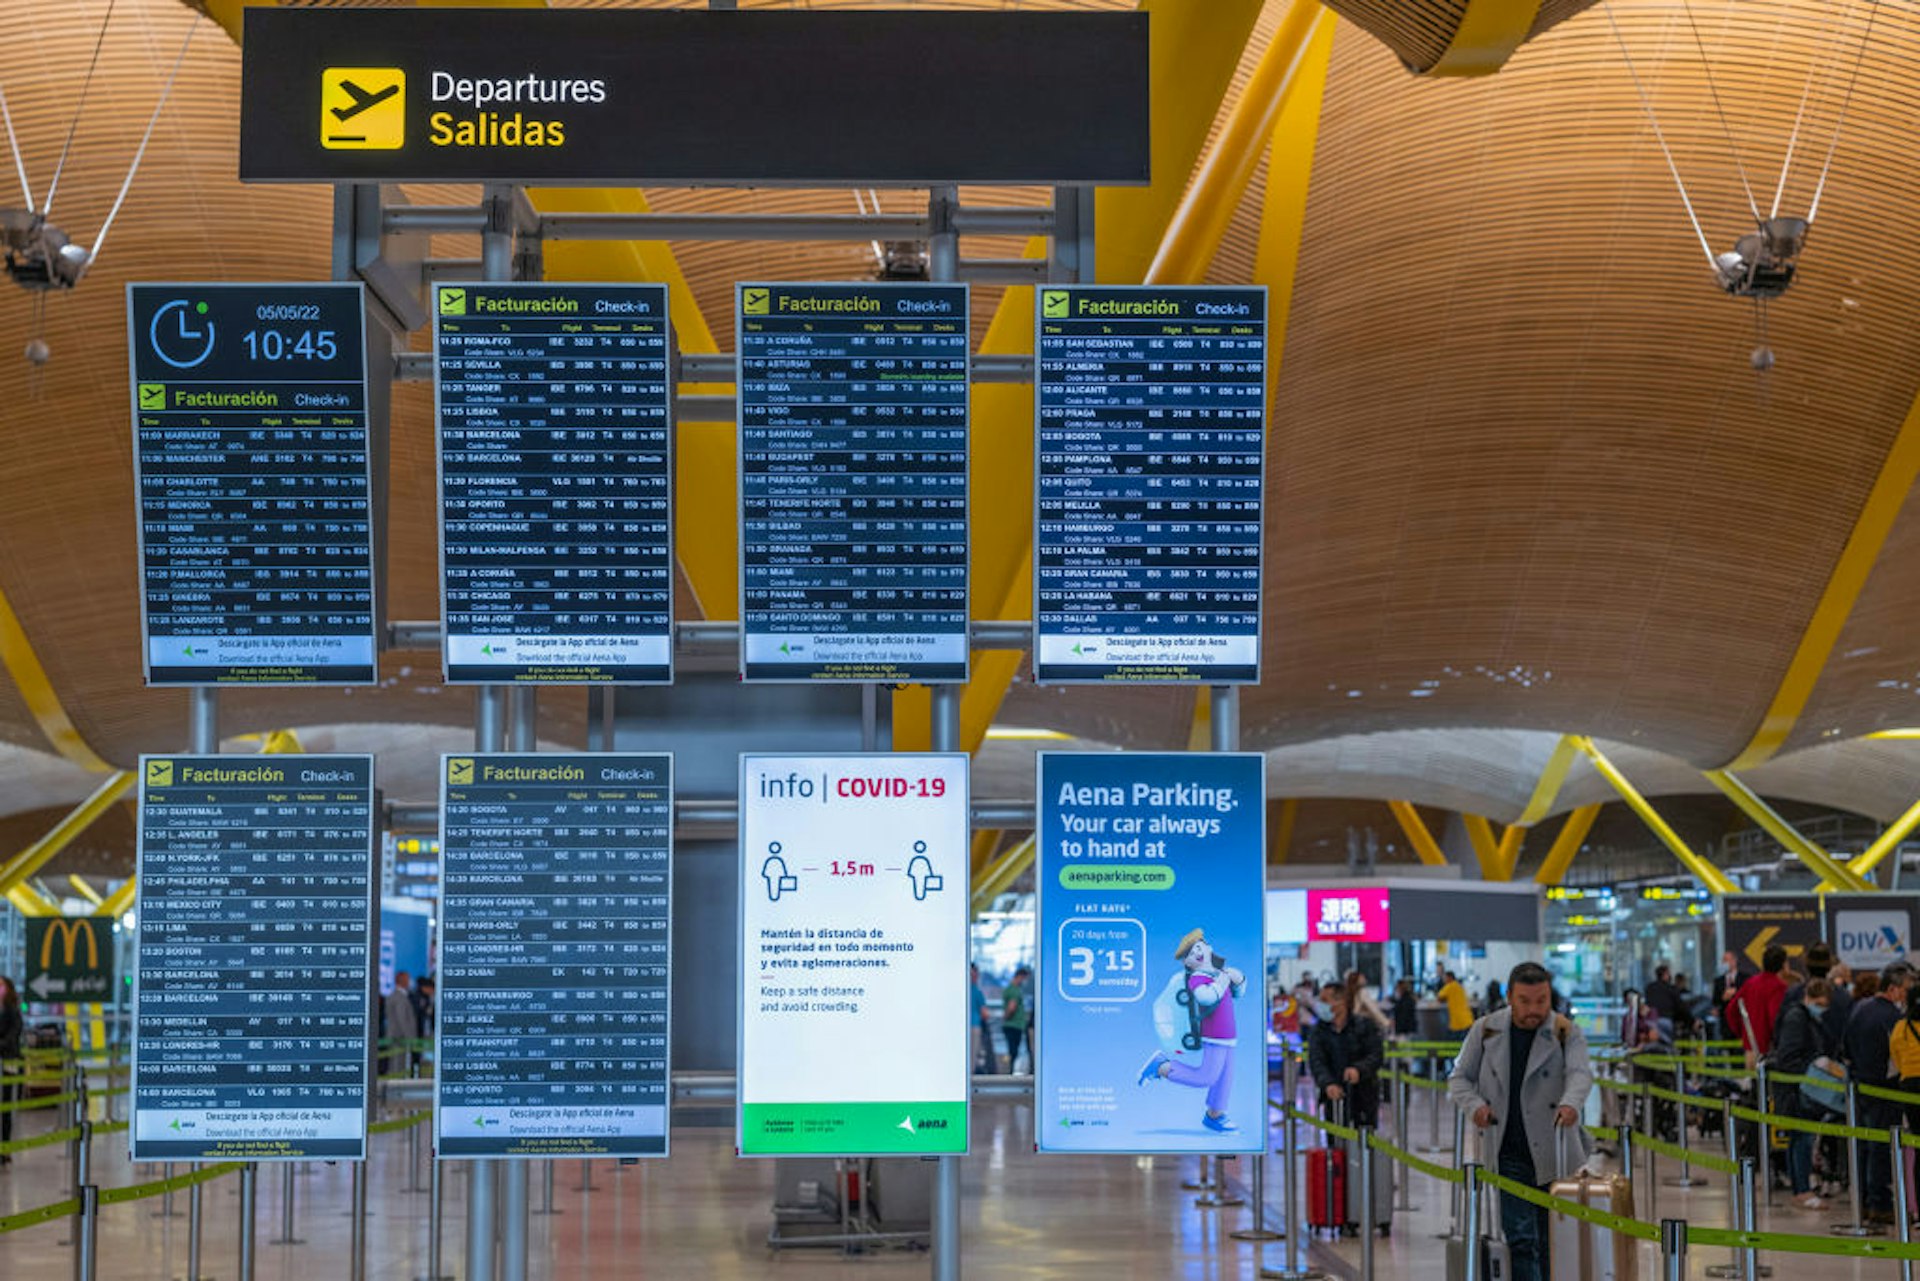 Electronic screens display flight information in the departures hall at Madrid Barajas airport